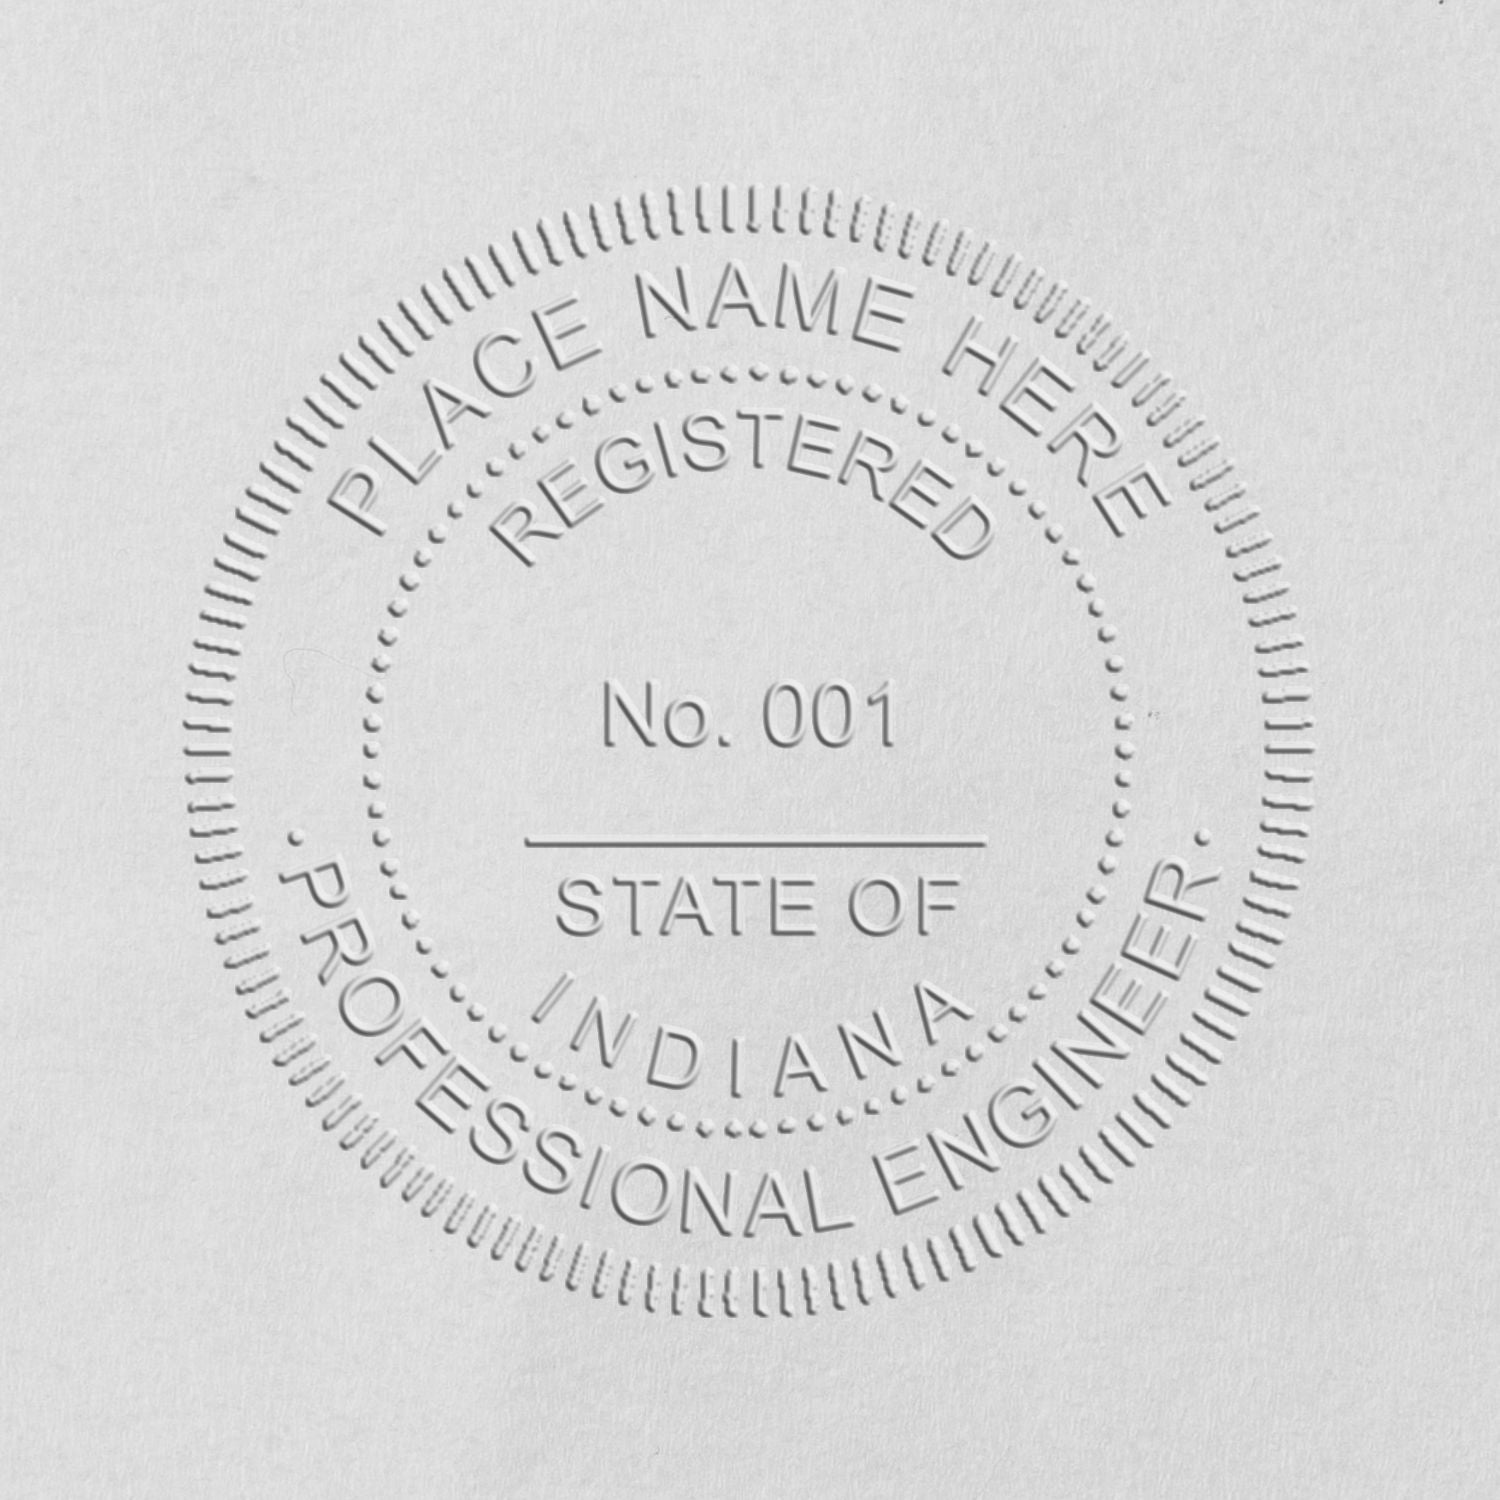 The State of Indiana Extended Long Reach Engineer Seal stamp impression comes to life with a crisp, detailed photo on paper - showcasing true professional quality.